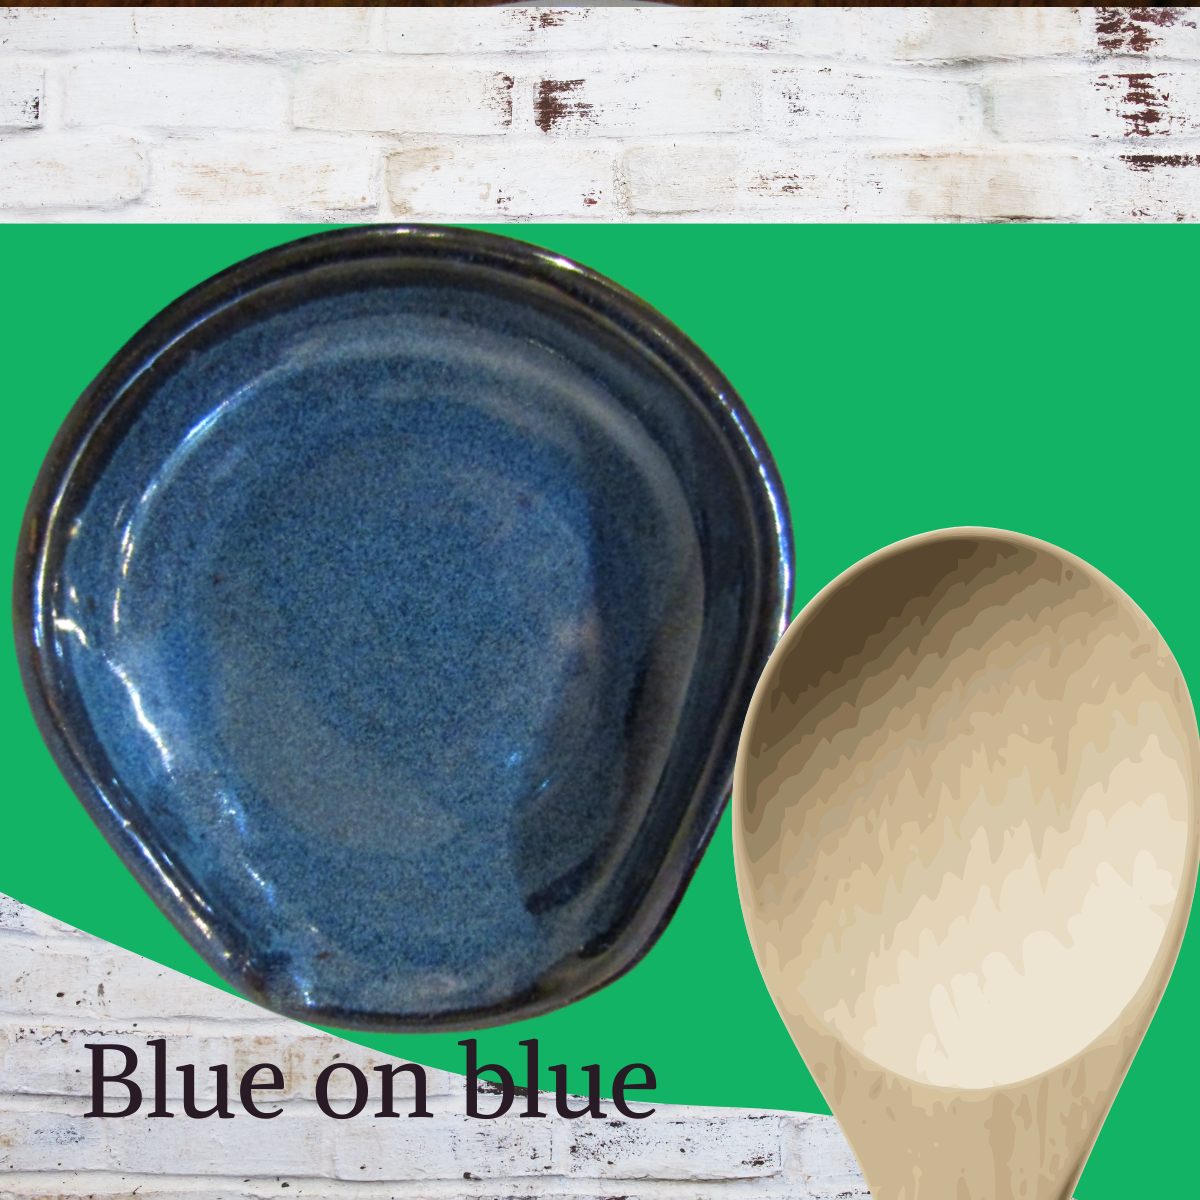 Pottery spoon rest for the stove and utensils. Ceramic tray for stove or countertop